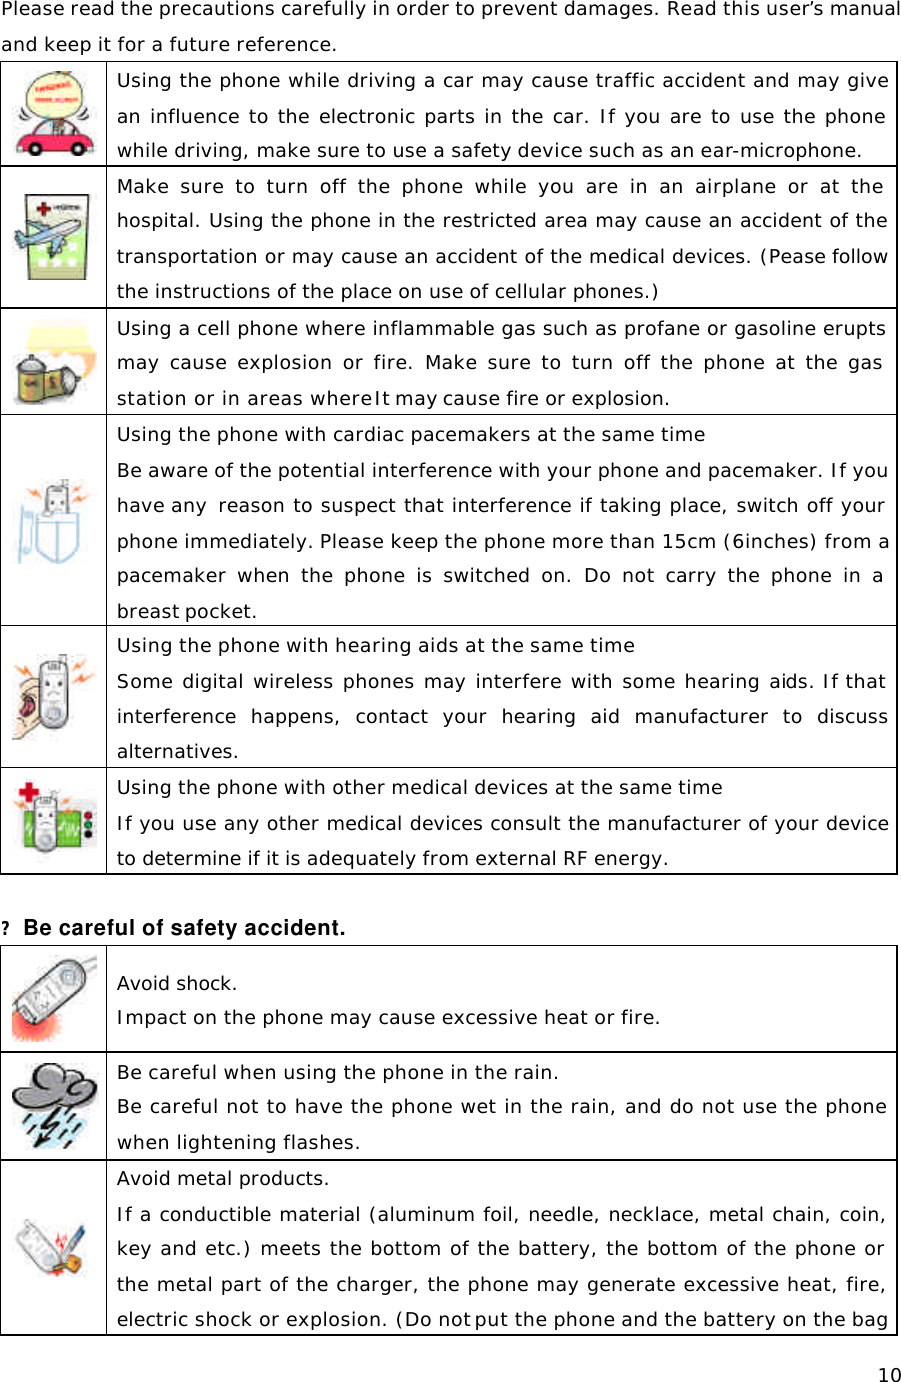   10Please read the precautions carefully in order to prevent damages. Read this user’s manual and keep it for a future reference.   Using the phone while driving a car may cause traffic accident and may give an influence to the electronic parts in the car. If you are to use the phone while driving, make sure to use a safety device such as an ear-microphone.   Make sure to turn off the phone while you are in an airplane or at the hospital. Using the phone in the restricted area may cause an accident of the transportation or may cause an accident of the medical devices. (Pease follow the instructions of the place on use of cellular phones.)  Using a cell phone where inflammable gas such as profane or gasoline erupts may cause explosion or fire. Make sure to turn off the phone at the gas station or in areas where It may cause fire or explosion.   Using the phone with cardiac pacemakers at the same time Be aware of the potential interference with your phone and pacemaker. If you have any  reason to suspect that interference if taking place, switch off your phone immediately. Please keep the phone more than 15cm (6inches) from a pacemaker when the phone is switched on. Do not carry the phone in a breast pocket.    Using the phone with hearing aids at the same time Some digital wireless phones may interfere with some hearing aids. If that interference happens, contact your hearing aid manufacturer to discuss alternatives.   Using the phone with other medical devices at the same time If you use any other medical devices consult the manufacturer of your device to determine if it is adequately from external RF energy.   ? Be careful of safety accident.    Avoid shock.  Impact on the phone may cause excessive heat or fire.  Be careful when using the phone in the rain.   Be careful not to have the phone wet in the rain, and do not use the phone when lightening flashes.  Avoid metal products. If a conductible material (aluminum foil, needle, necklace, metal chain, coin, key and etc.) meets the bottom of the battery, the bottom of the phone or the metal part of the charger, the phone may generate excessive heat, fire, electric shock or explosion. (Do not put the phone and the battery on the bag 